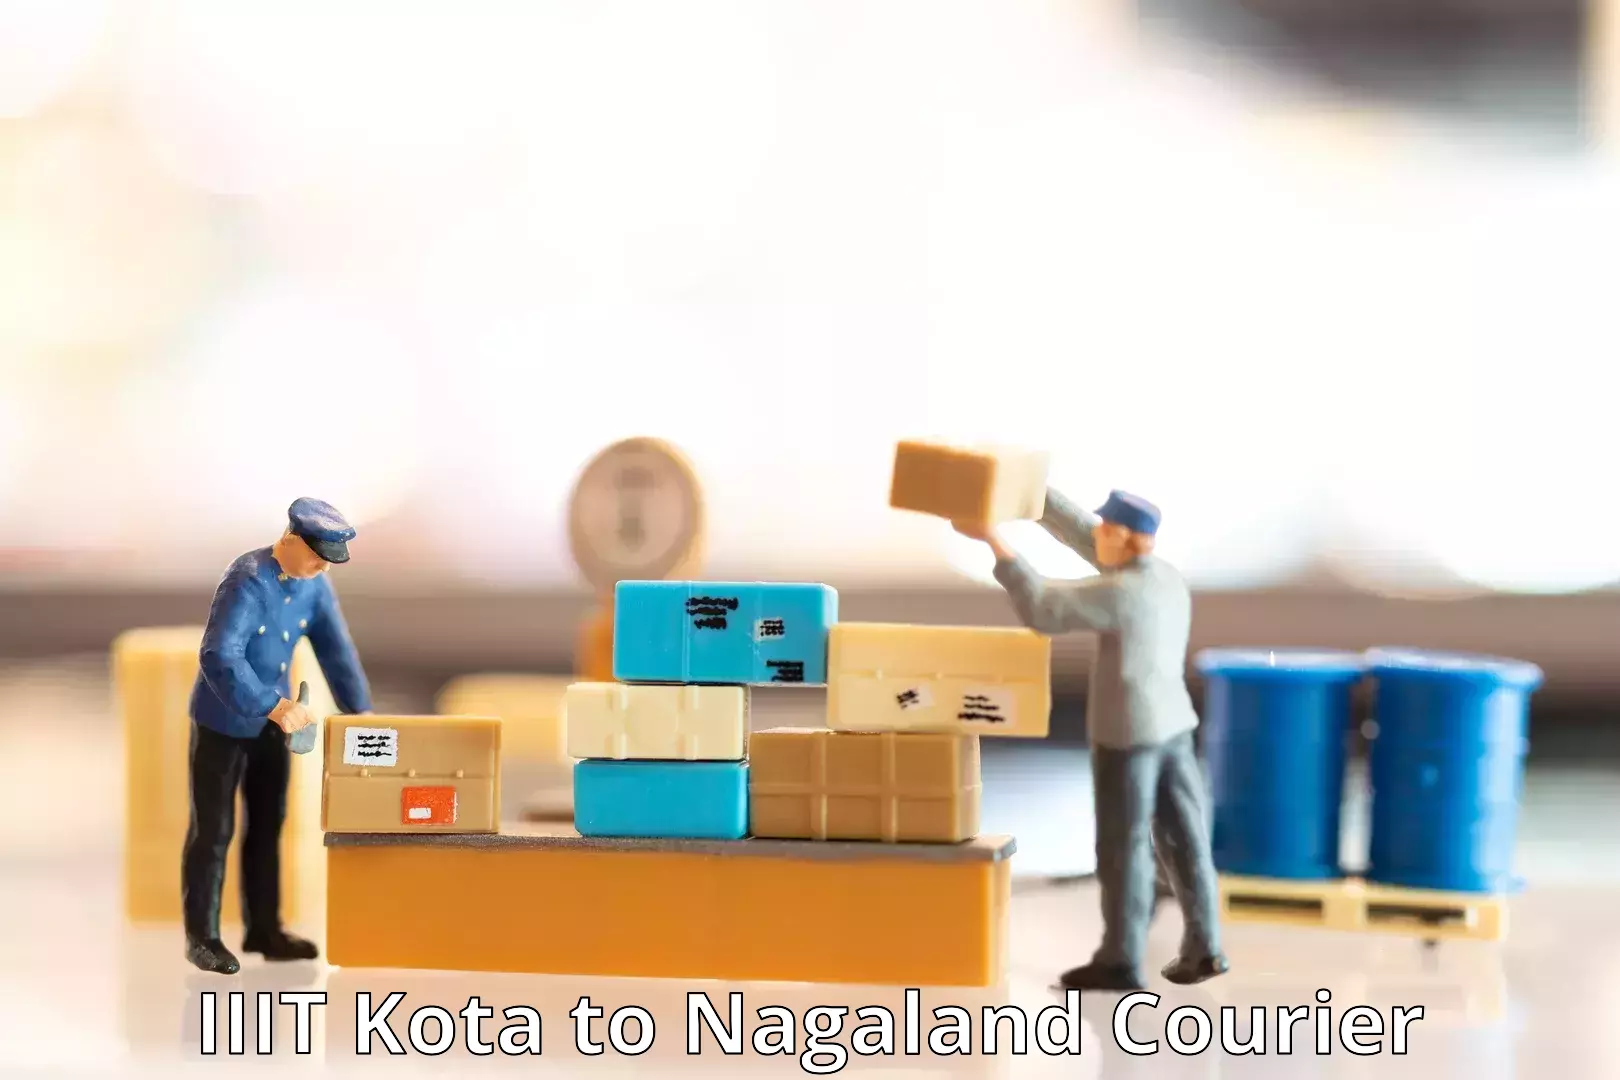 Speedy delivery service IIIT Kota to Nagaland